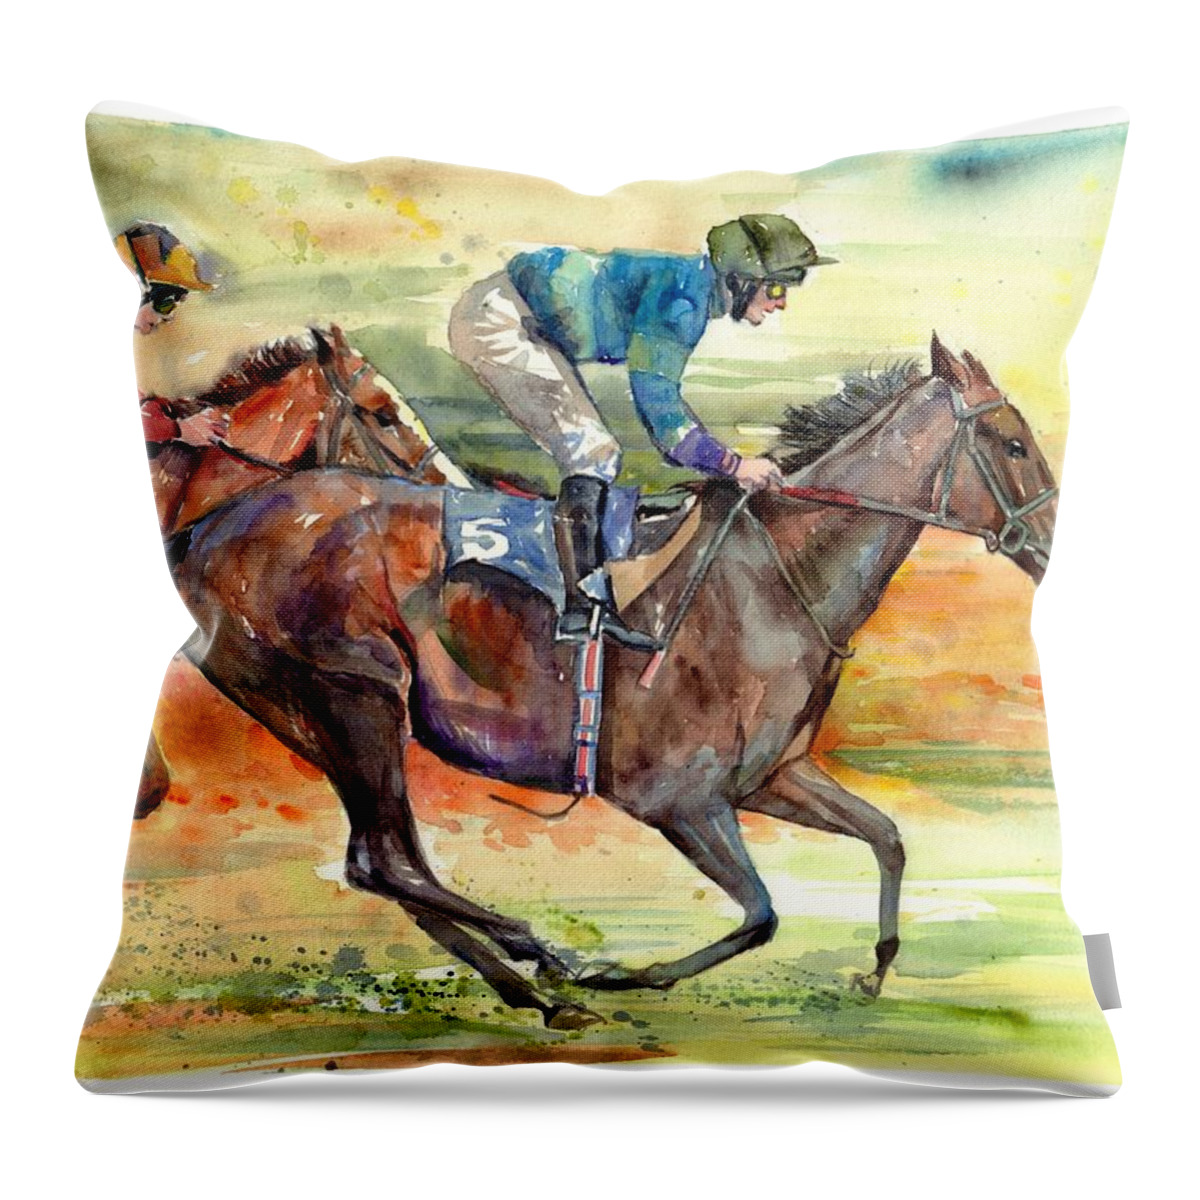 Horse Throw Pillow featuring the painting Horse Races by Suzann Sines